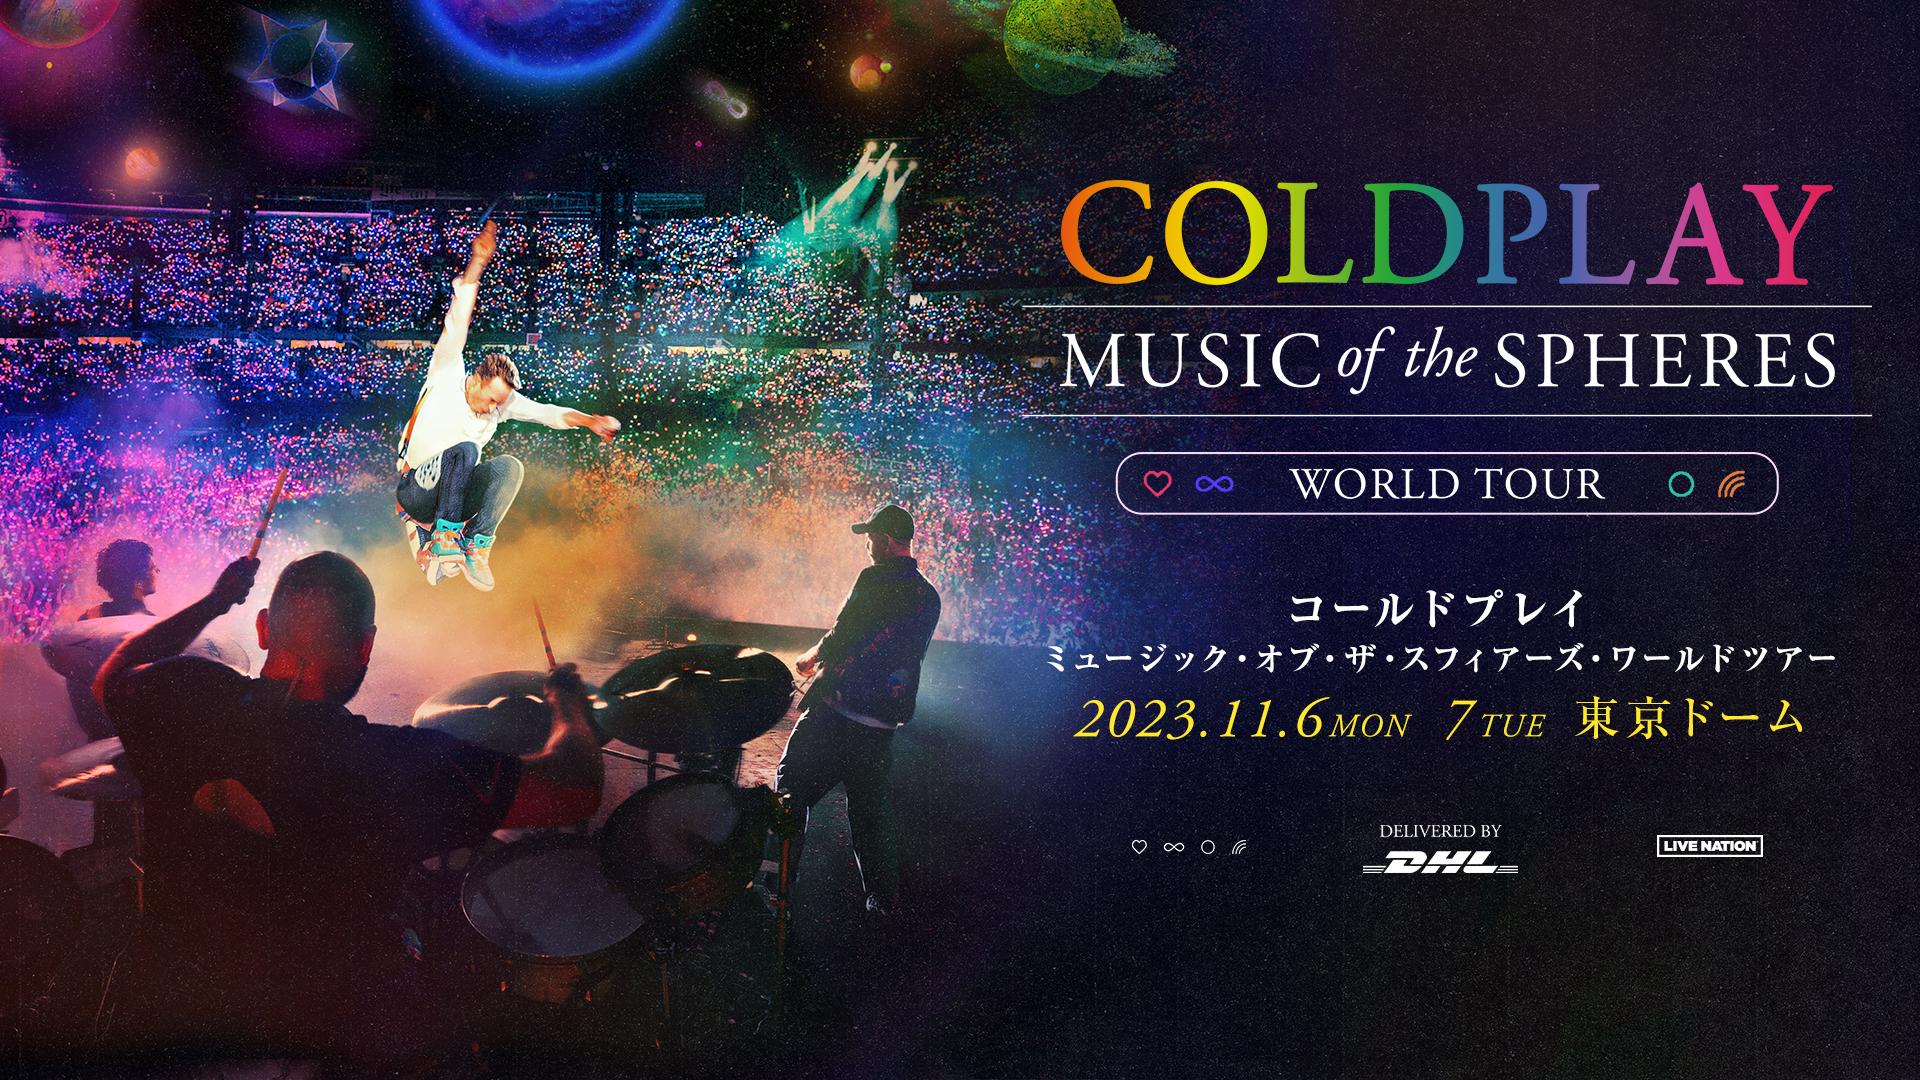 COLDPLAY 東京ドーム公演限定ポスター MUSIC of the SPHERES LIVE 2023 